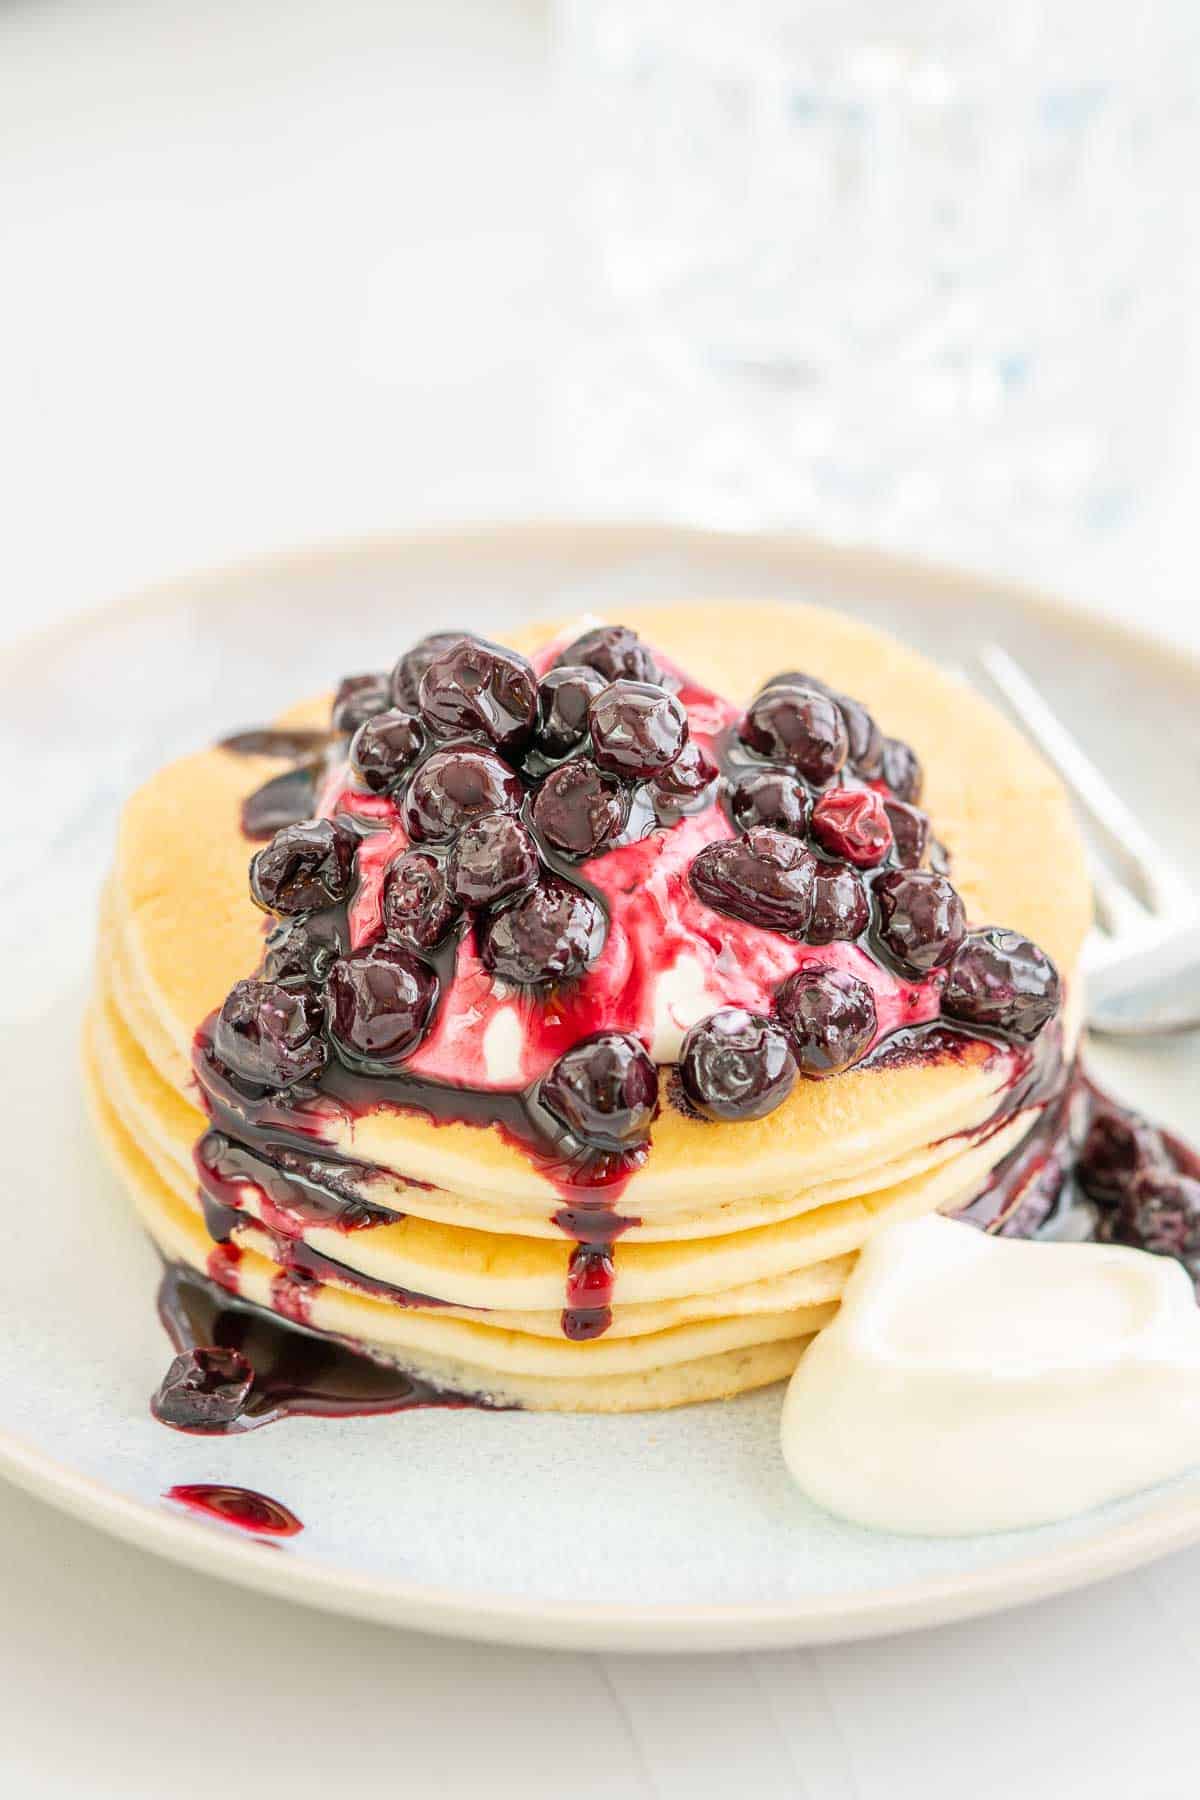 A short stack of pancakes drizzled with blueberry topping and yoghurt.